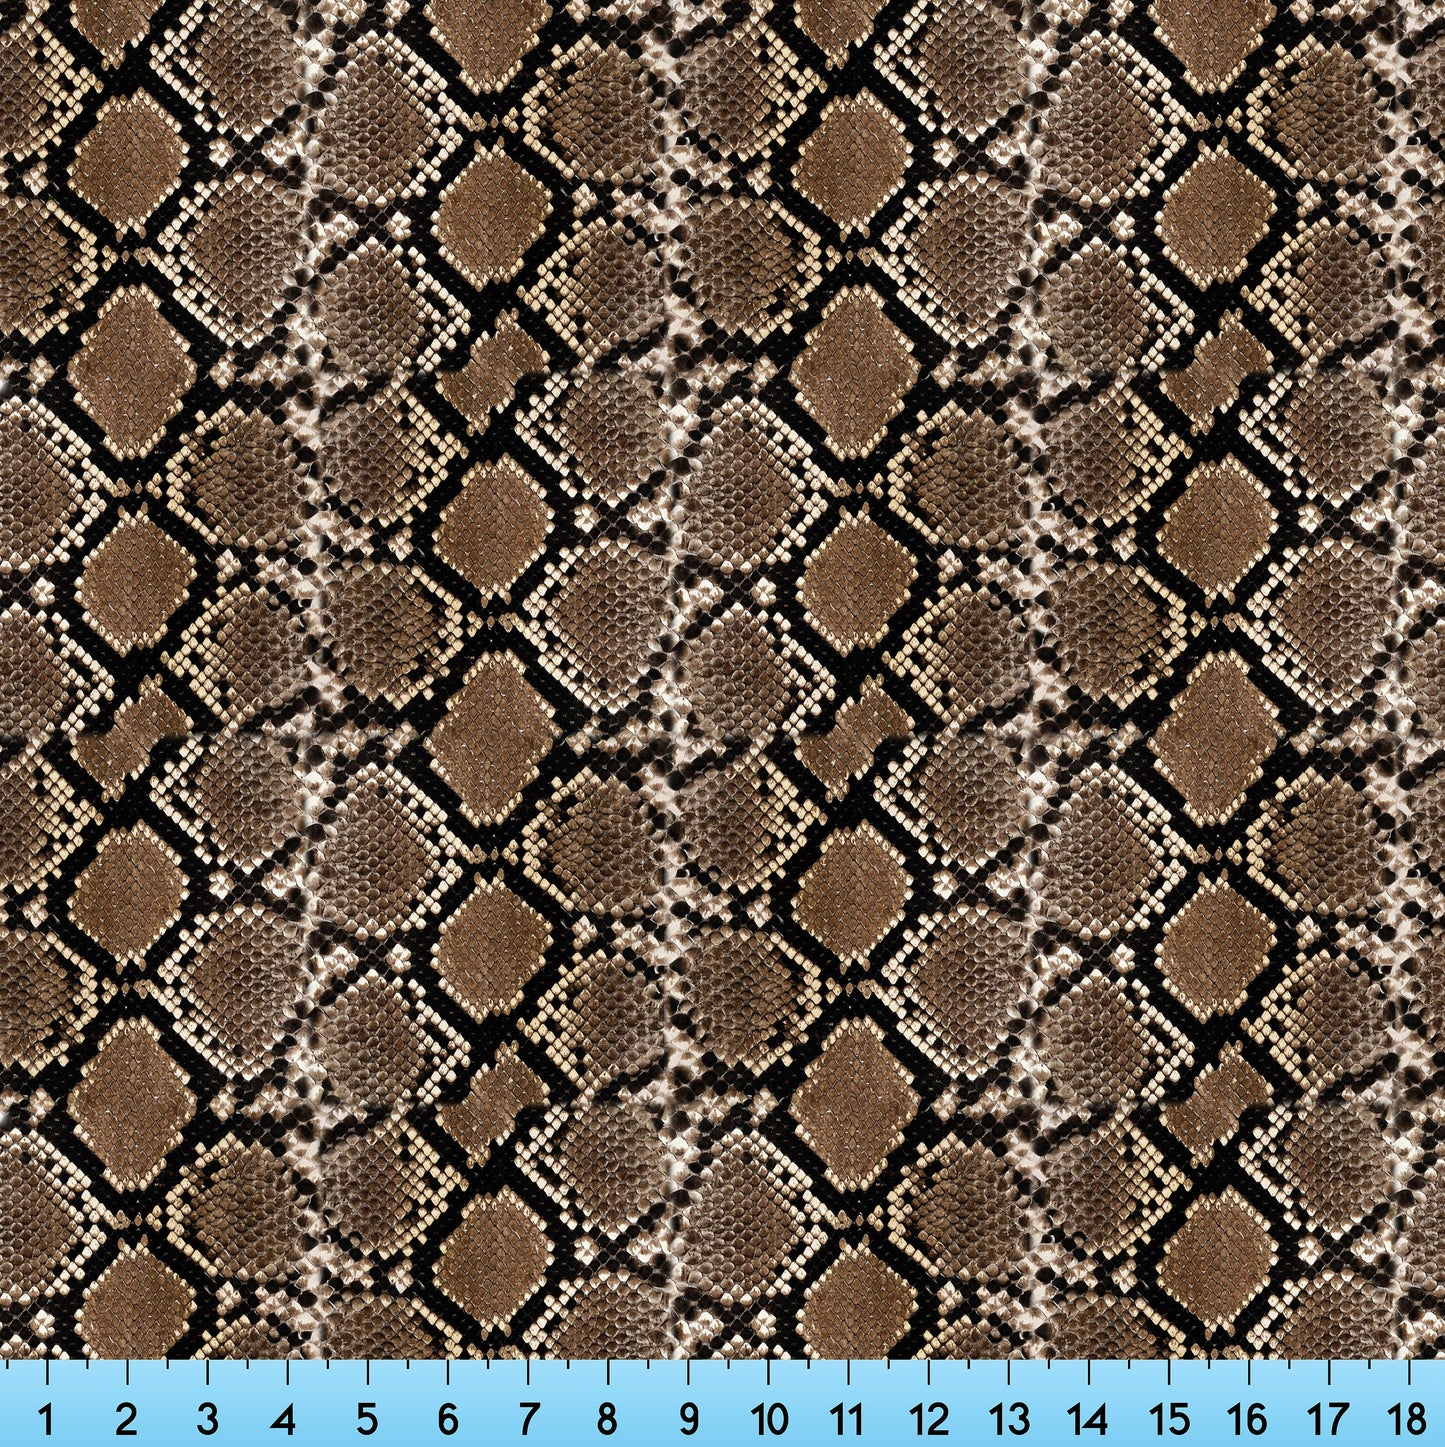 Snakeskin Fabric By The Yard